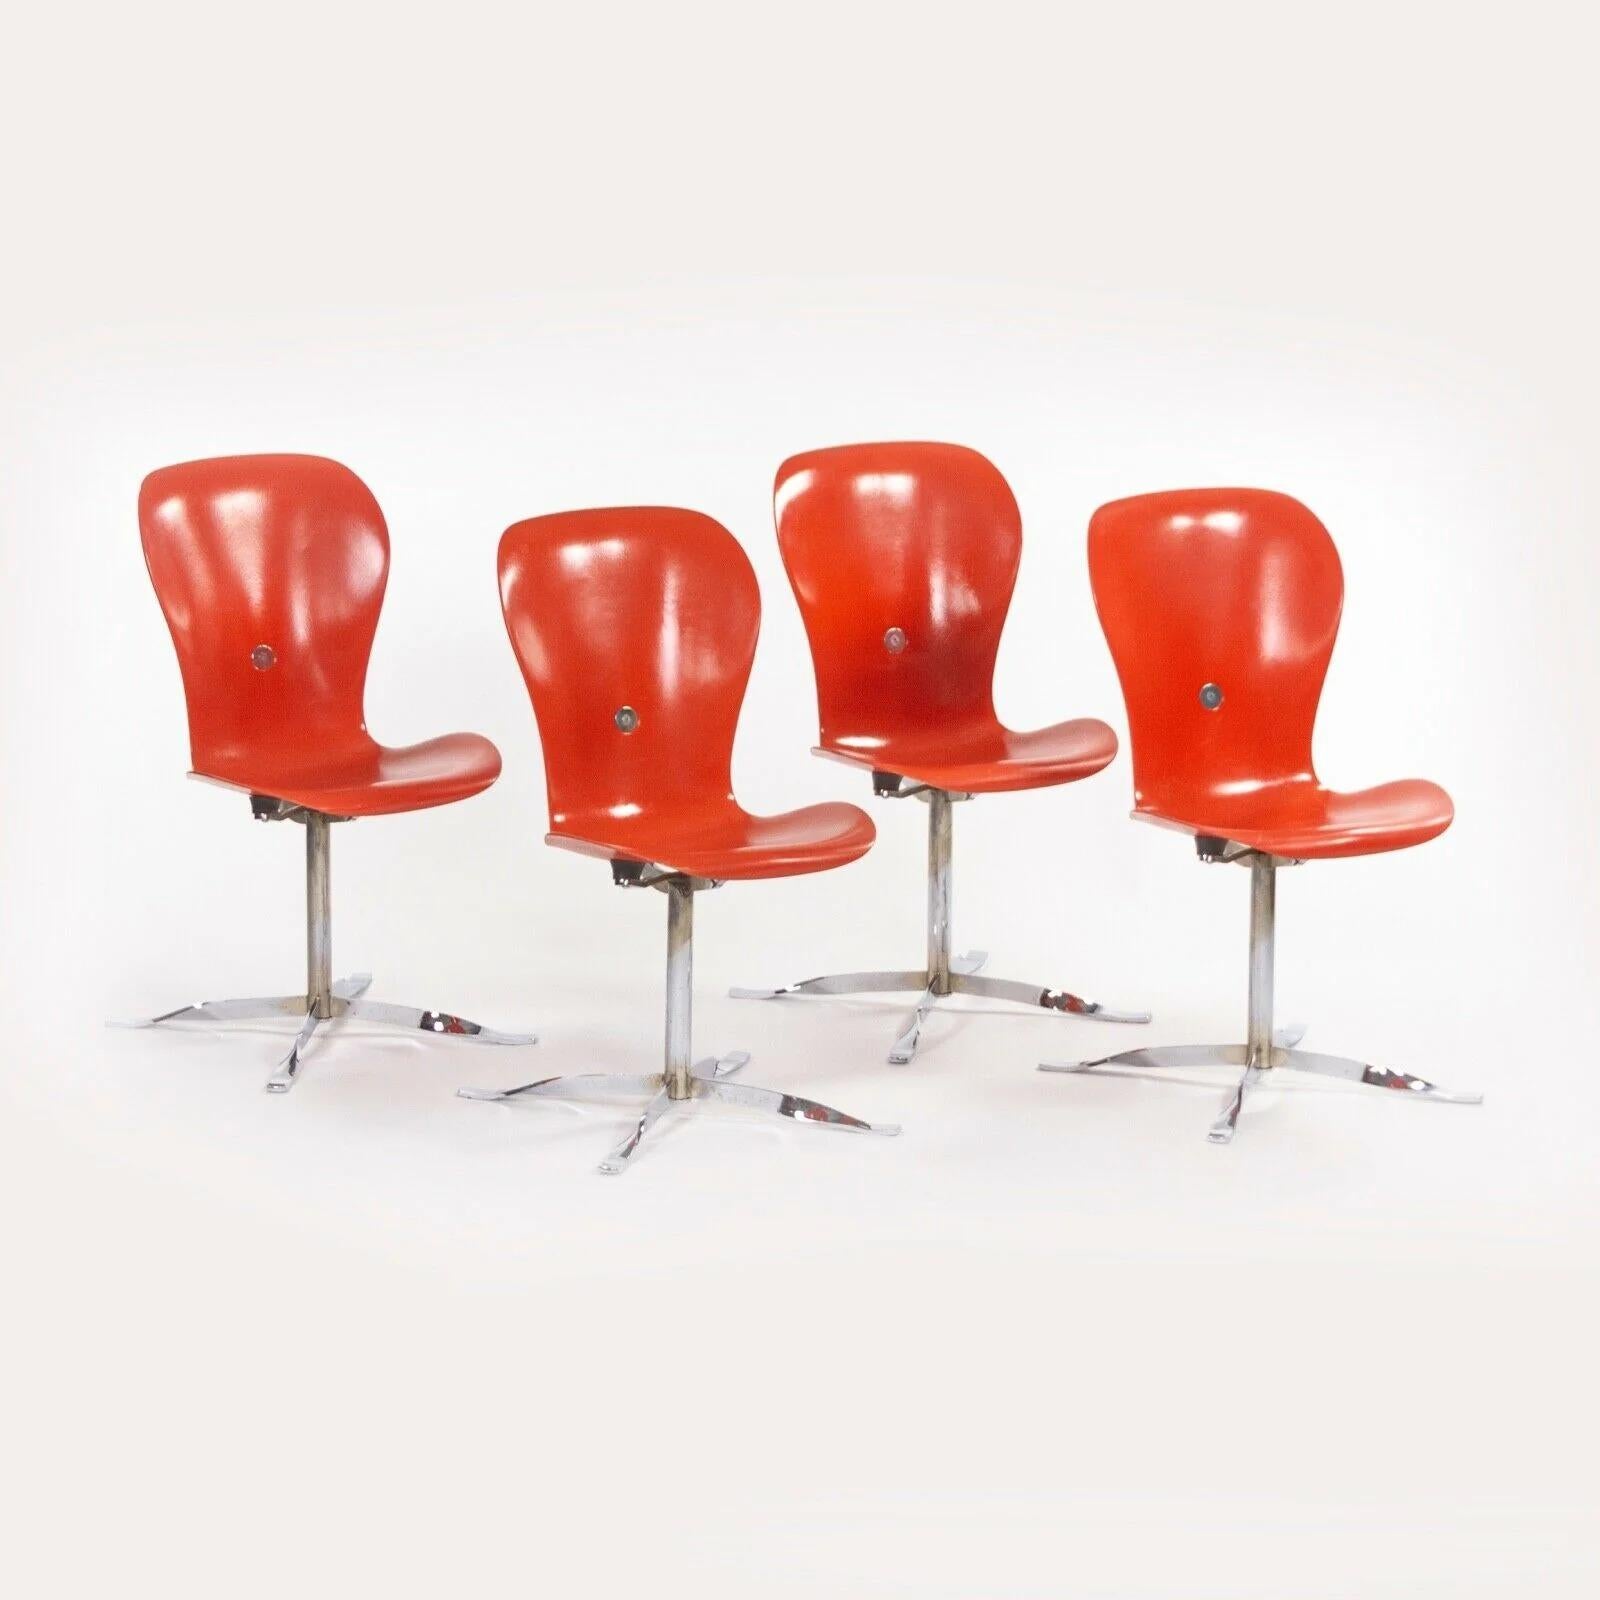 Modern 1974 Gideon Kramer Ion Chairs by American Desk Corp Fiberglass Sets Available For Sale